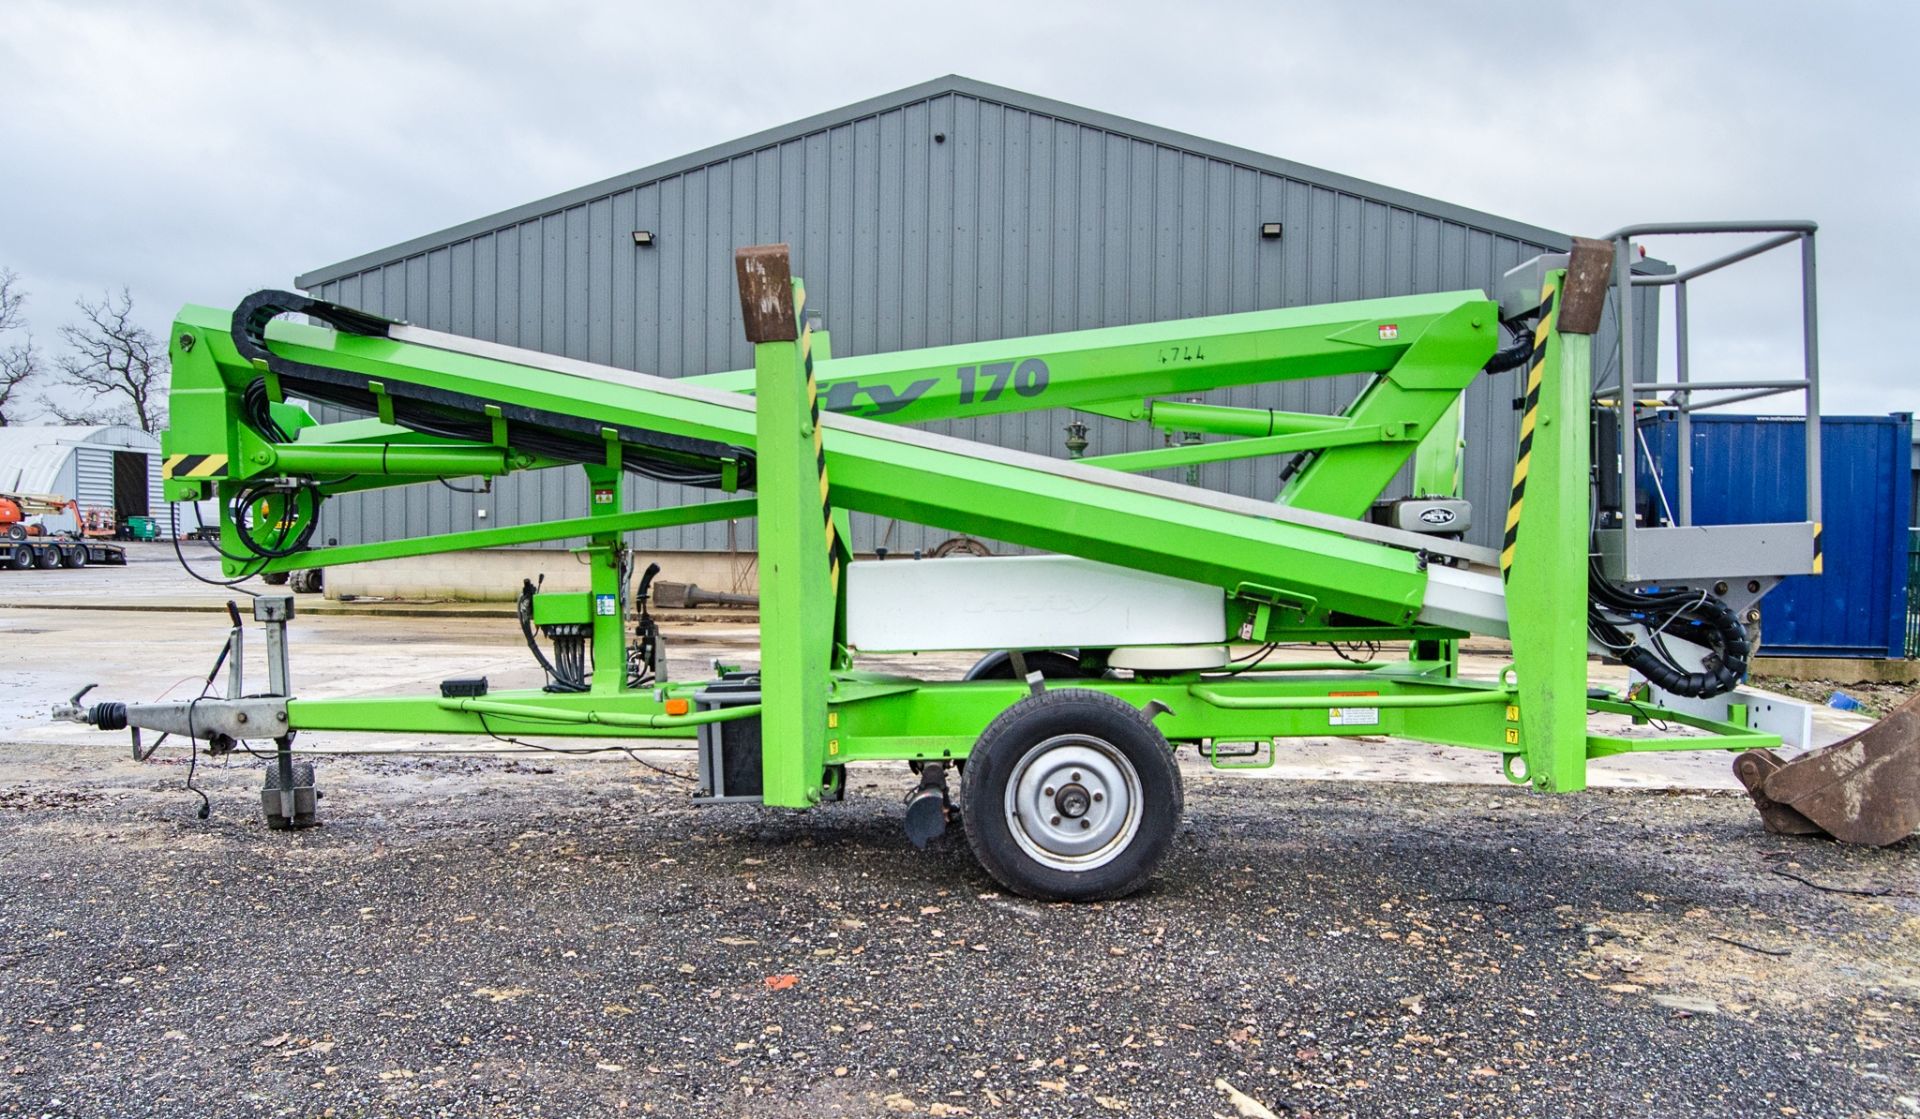 Nifty 170 diesel/battery fast tow articulated boom access platform Year: 2014 S/N: 1728150 4744 - Image 8 of 21